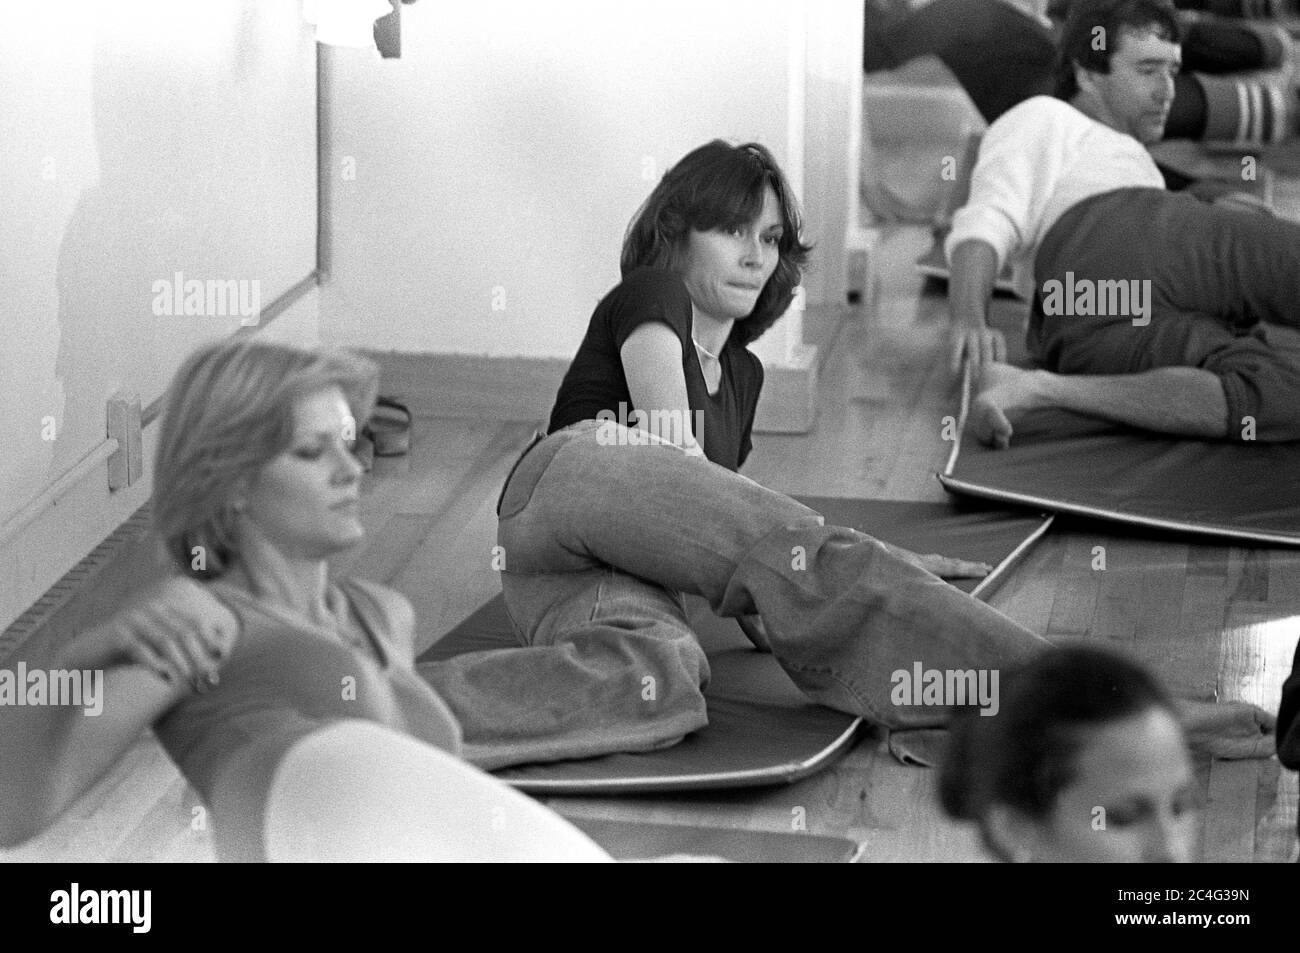 Actress Kate Jackson of Charlie's Angeles at Jane Fonda's Workout in Beverly Hills, CA, 1980 Stock Photo